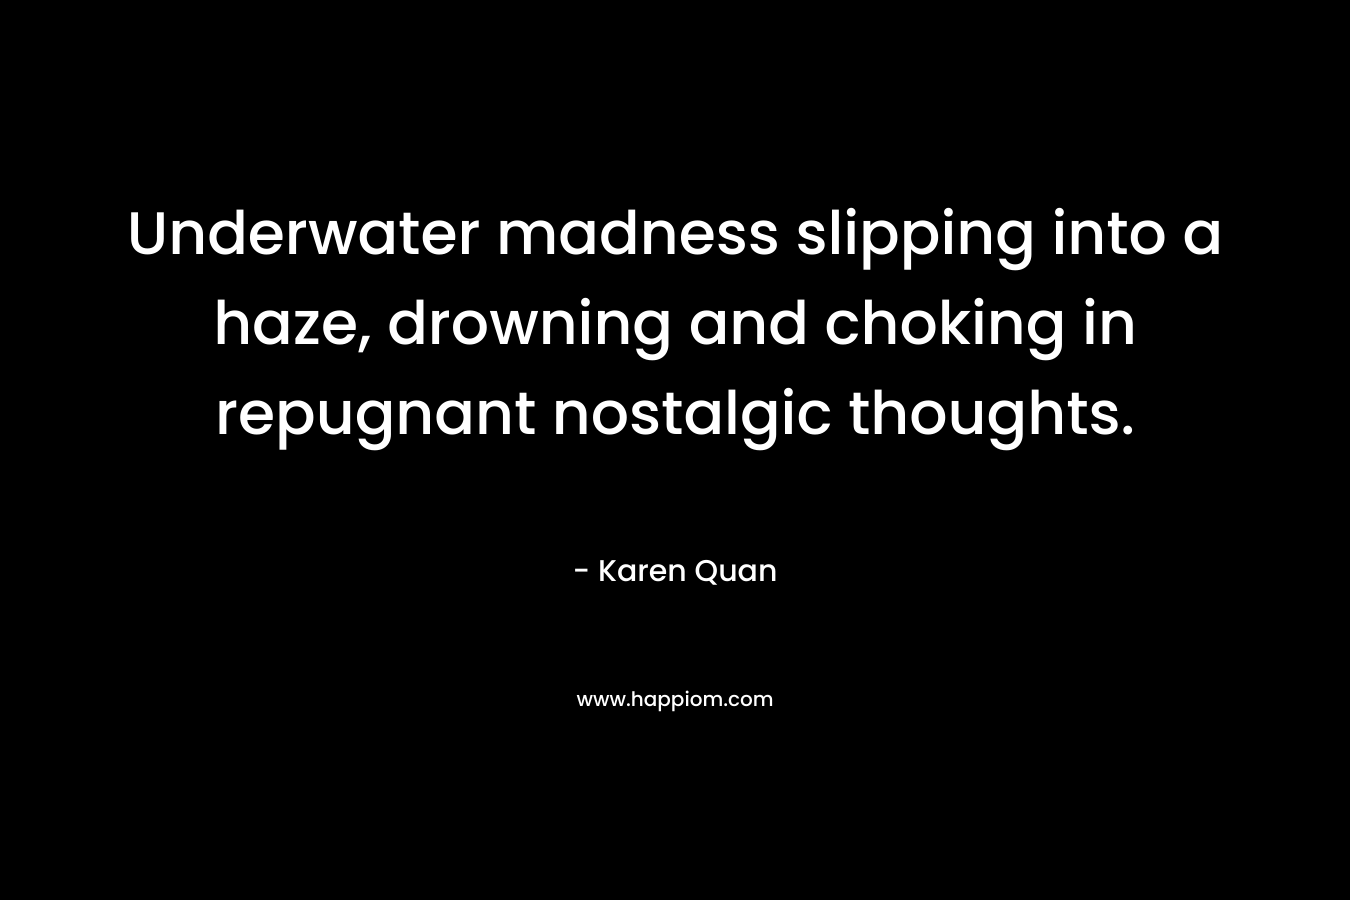 Underwater madness slipping into a haze, drowning and choking in repugnant nostalgic thoughts. – Karen Quan